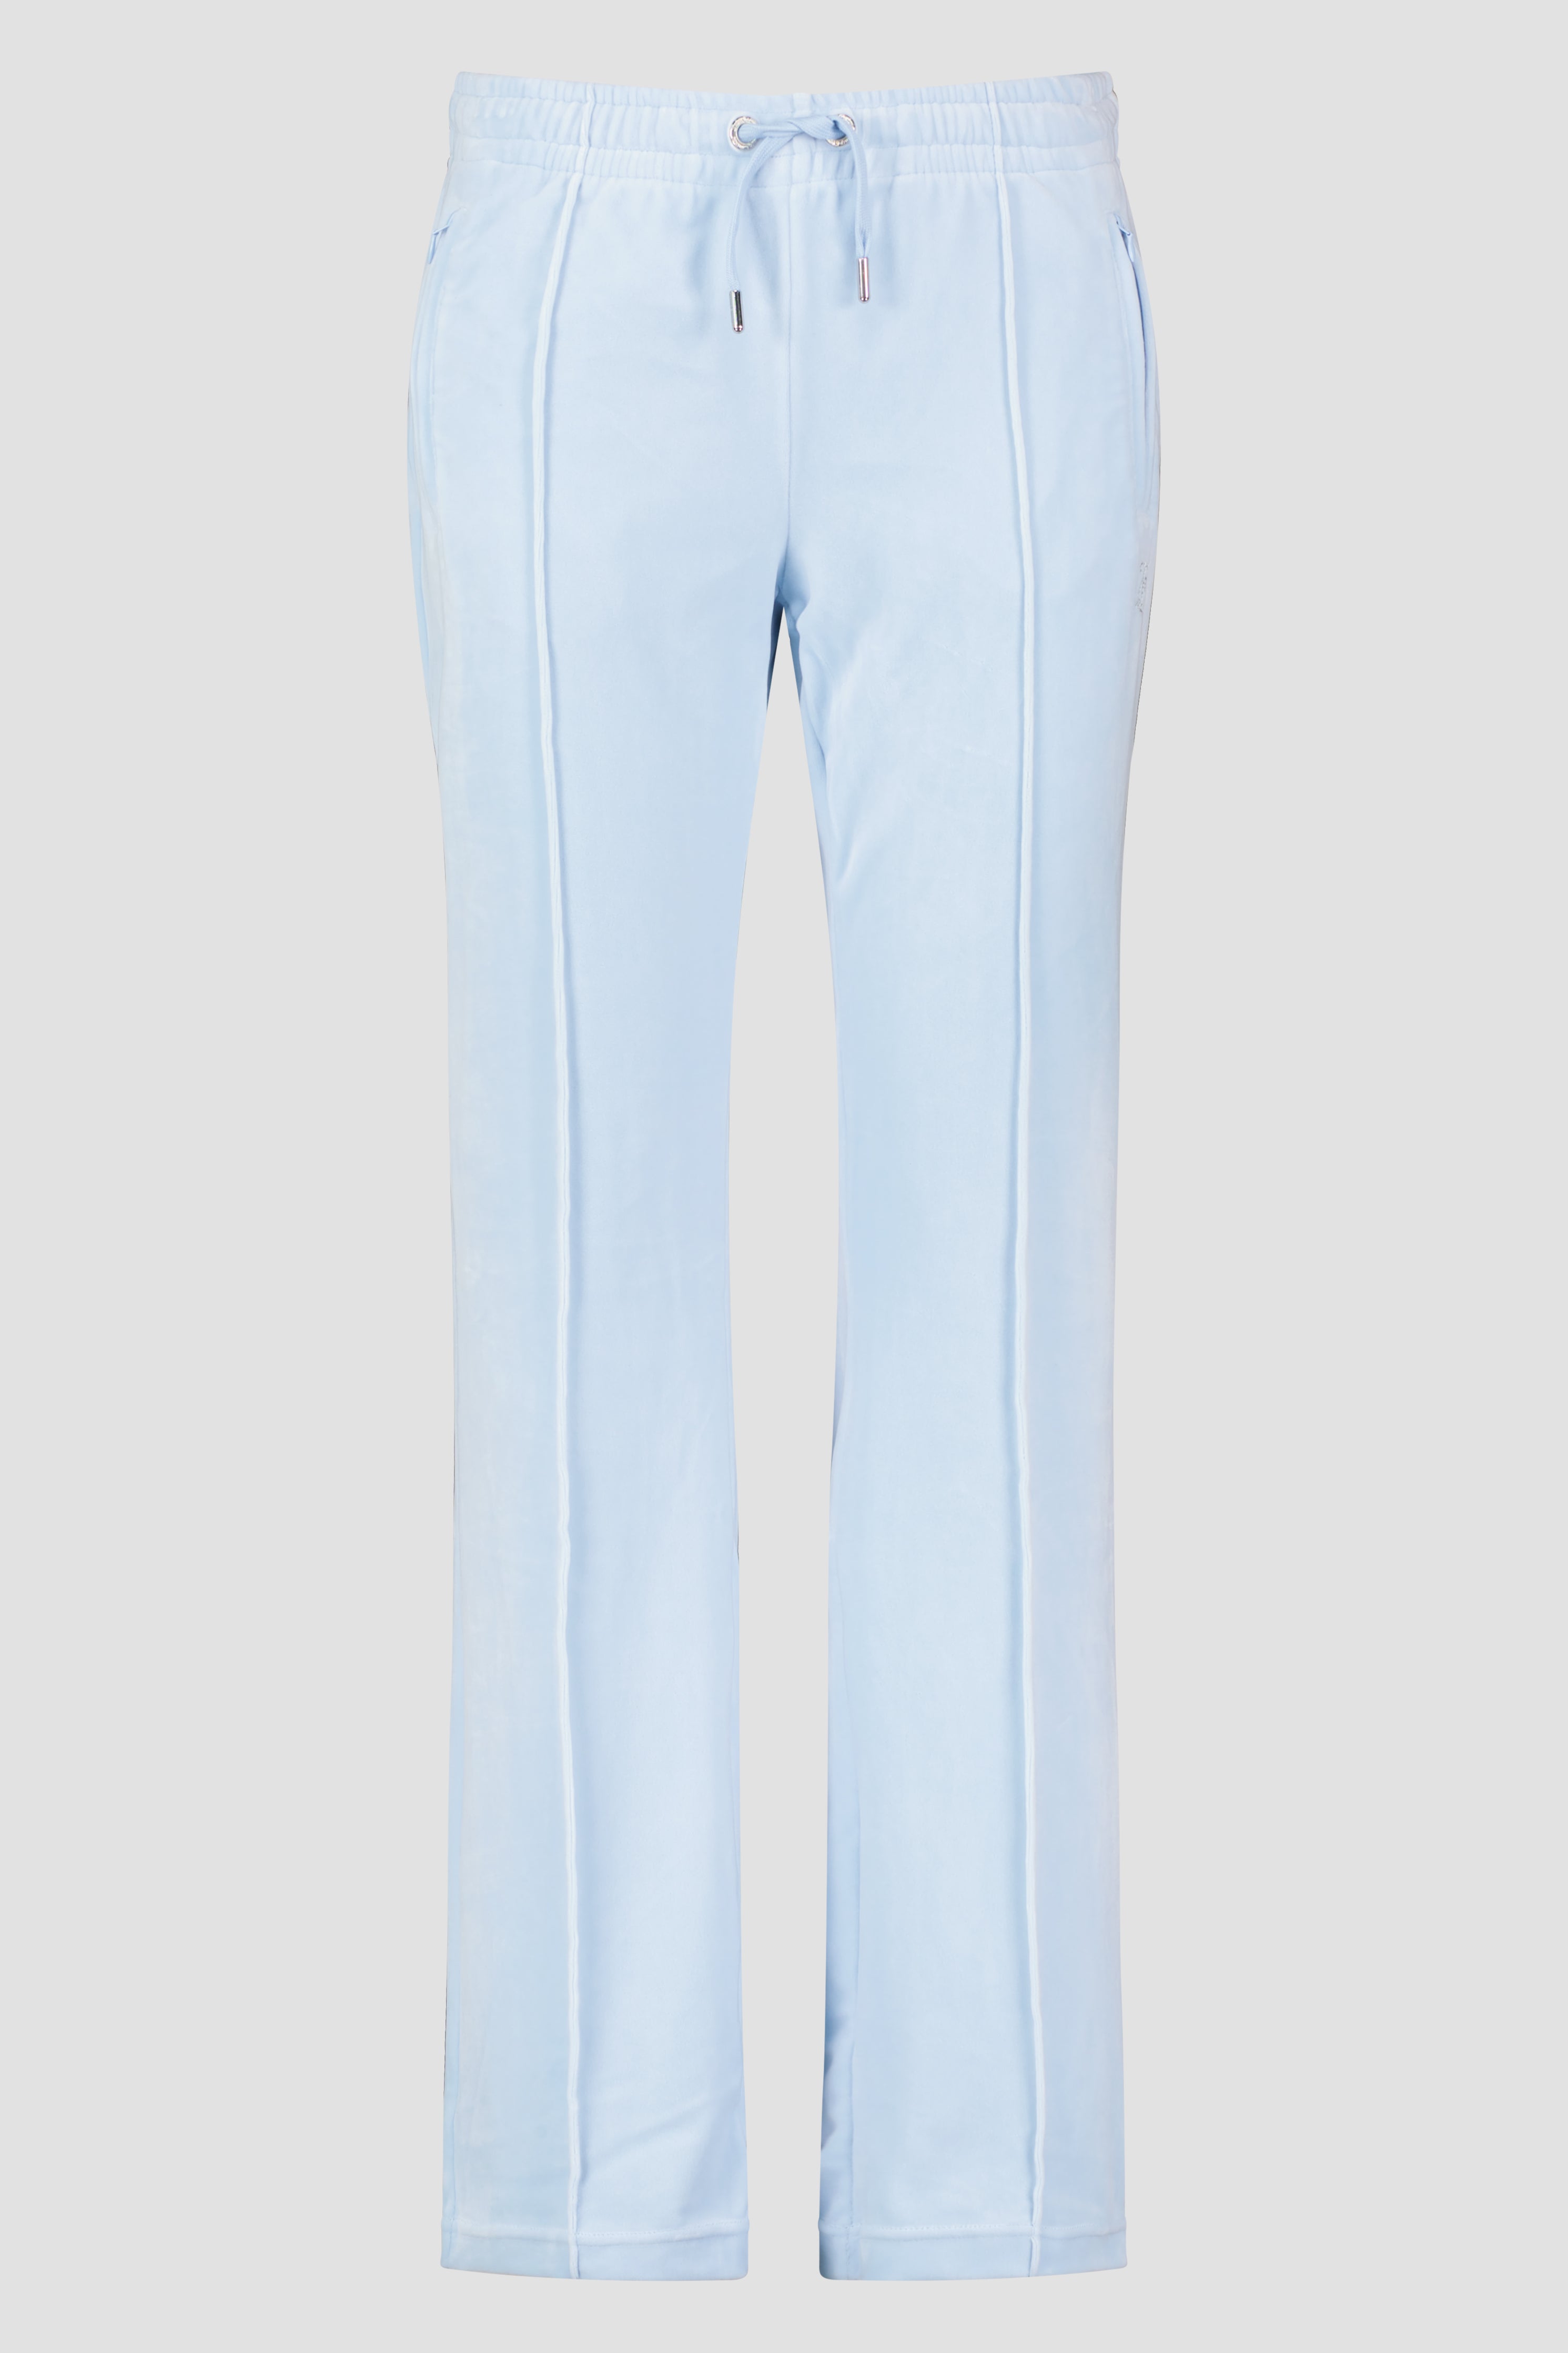 Women's Juicy Couture Powder Blue Tina Track Pant